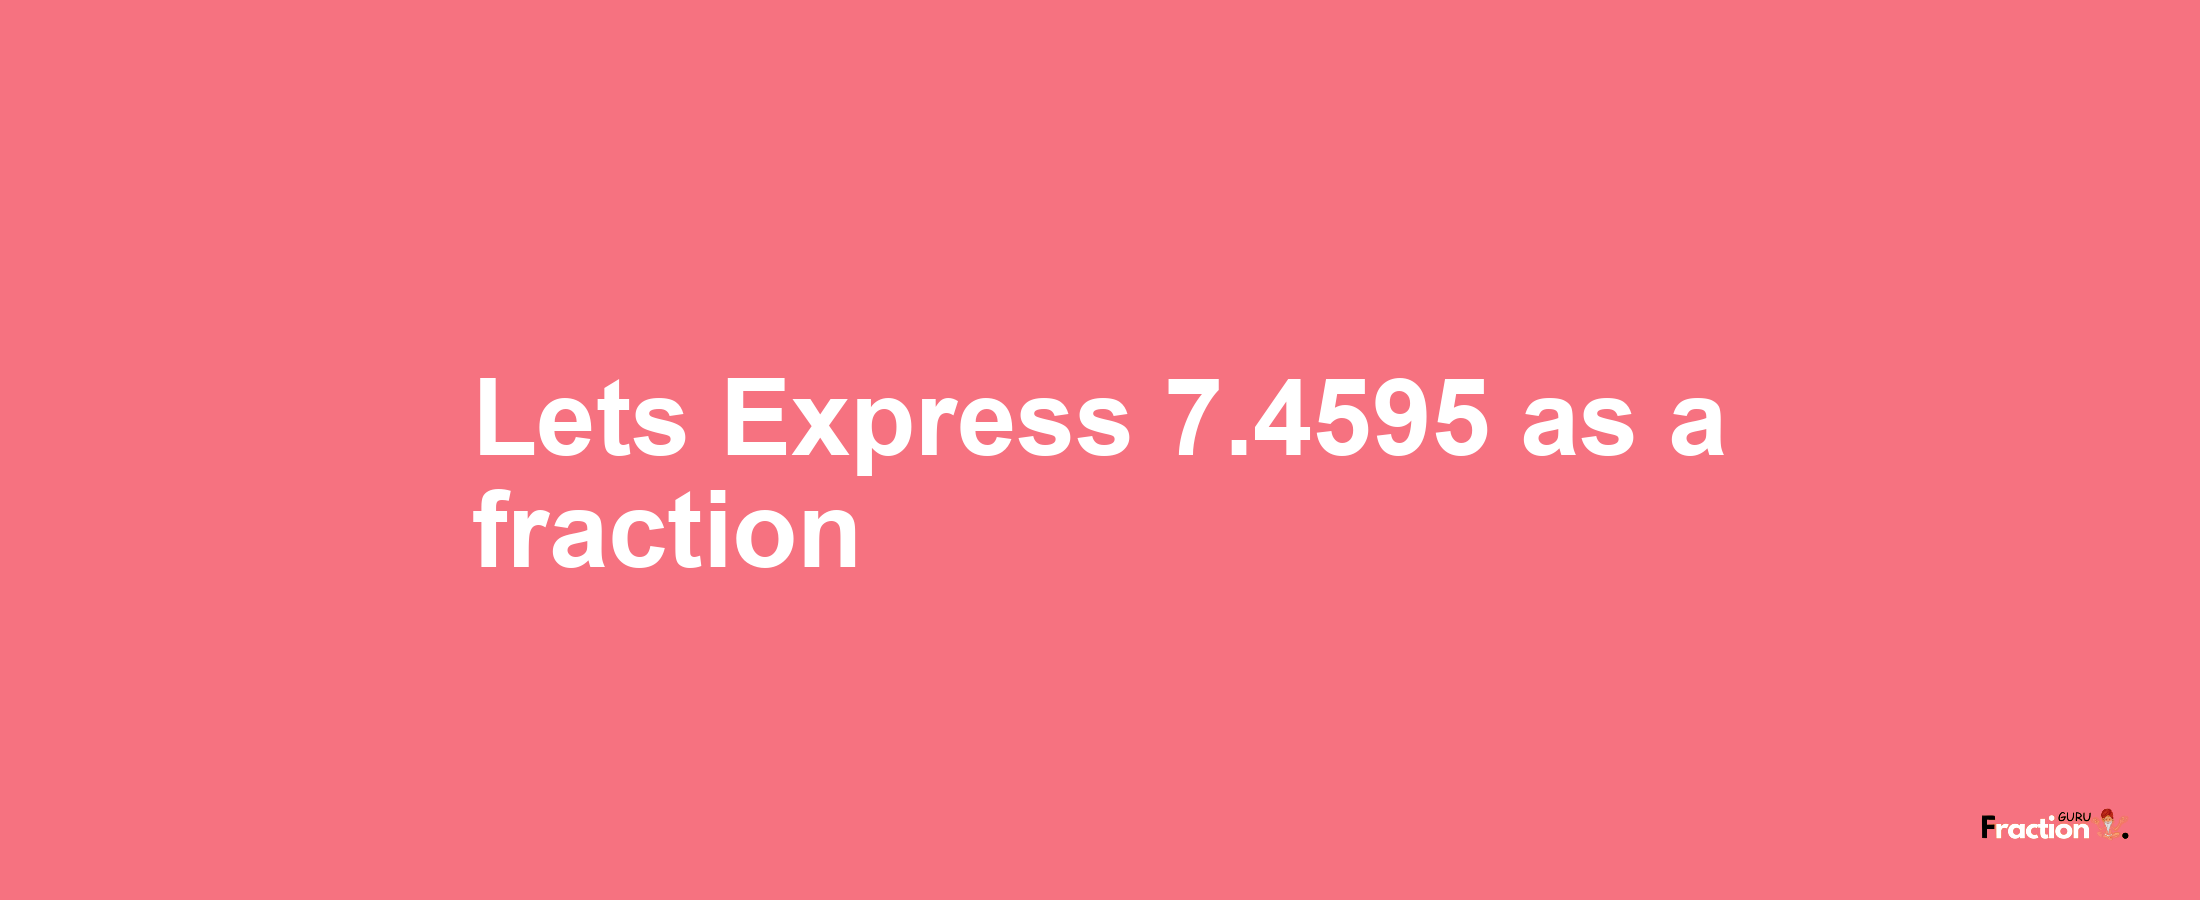 Lets Express 7.4595 as afraction